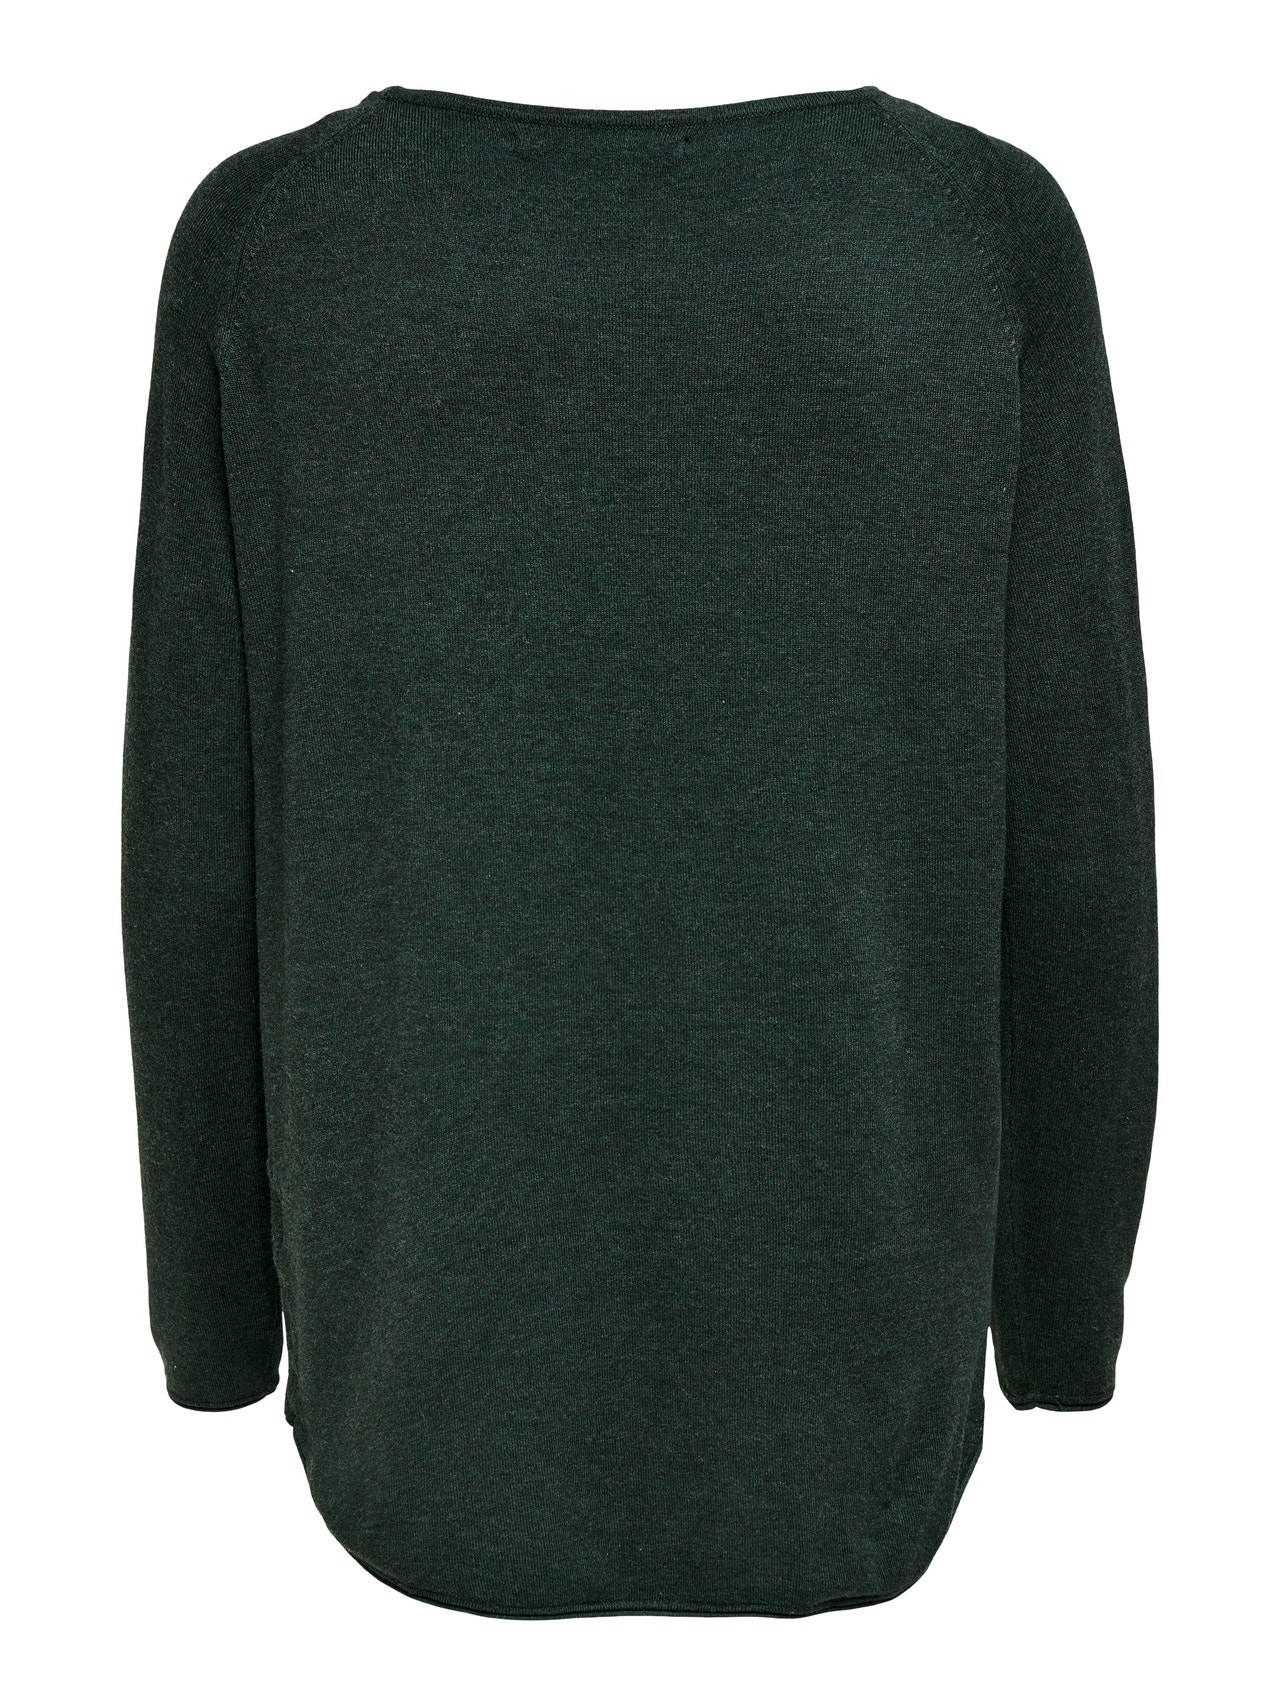 ONLY O-hals Pullover -Green Gables - 15109964